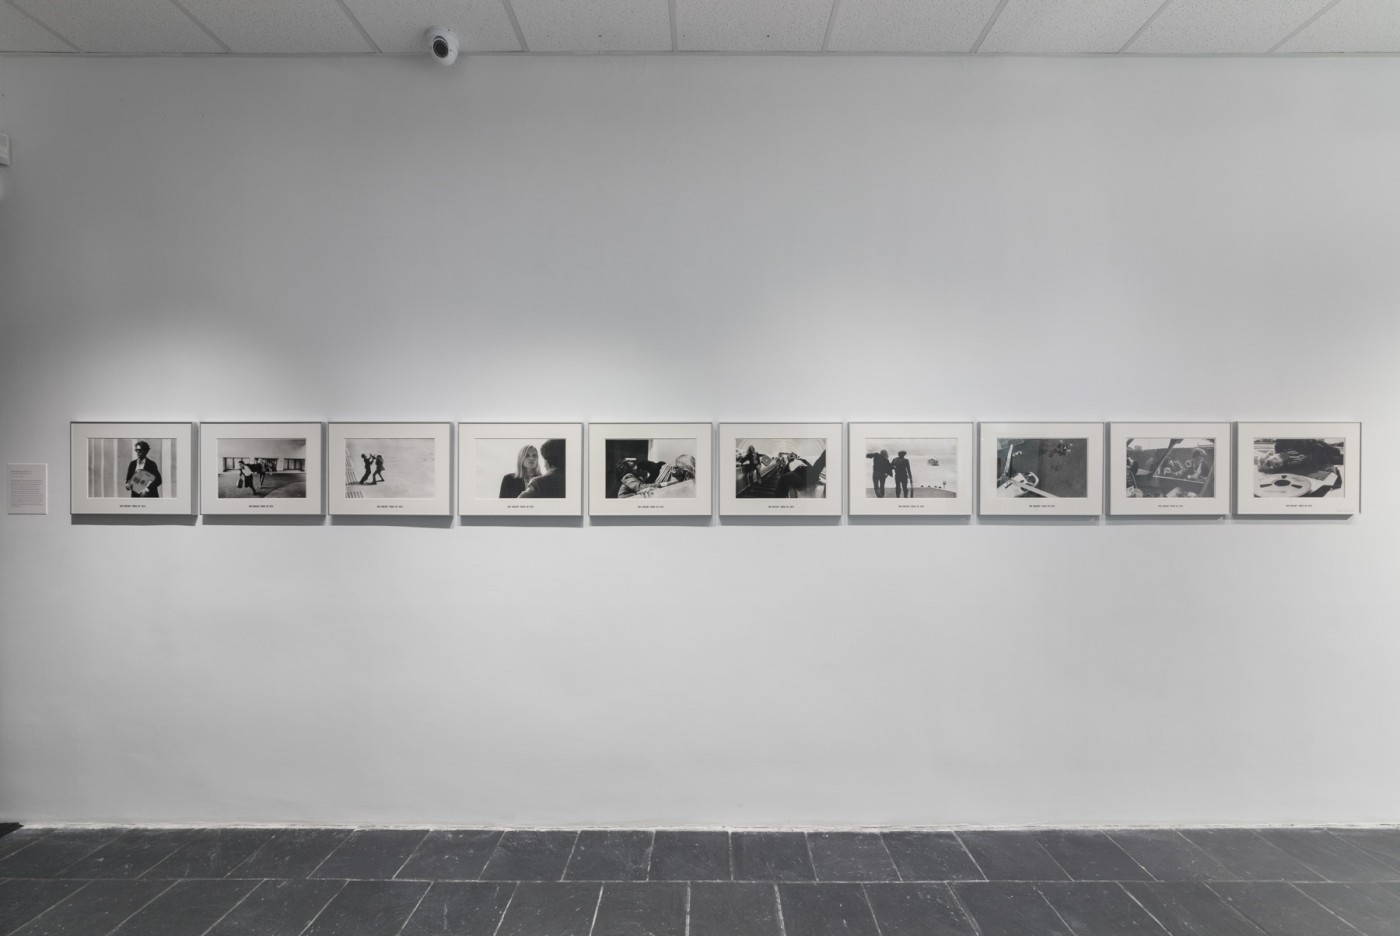 Installation view of ten black and white photographs by David Lamelas in a linear arrangement on a white wall.